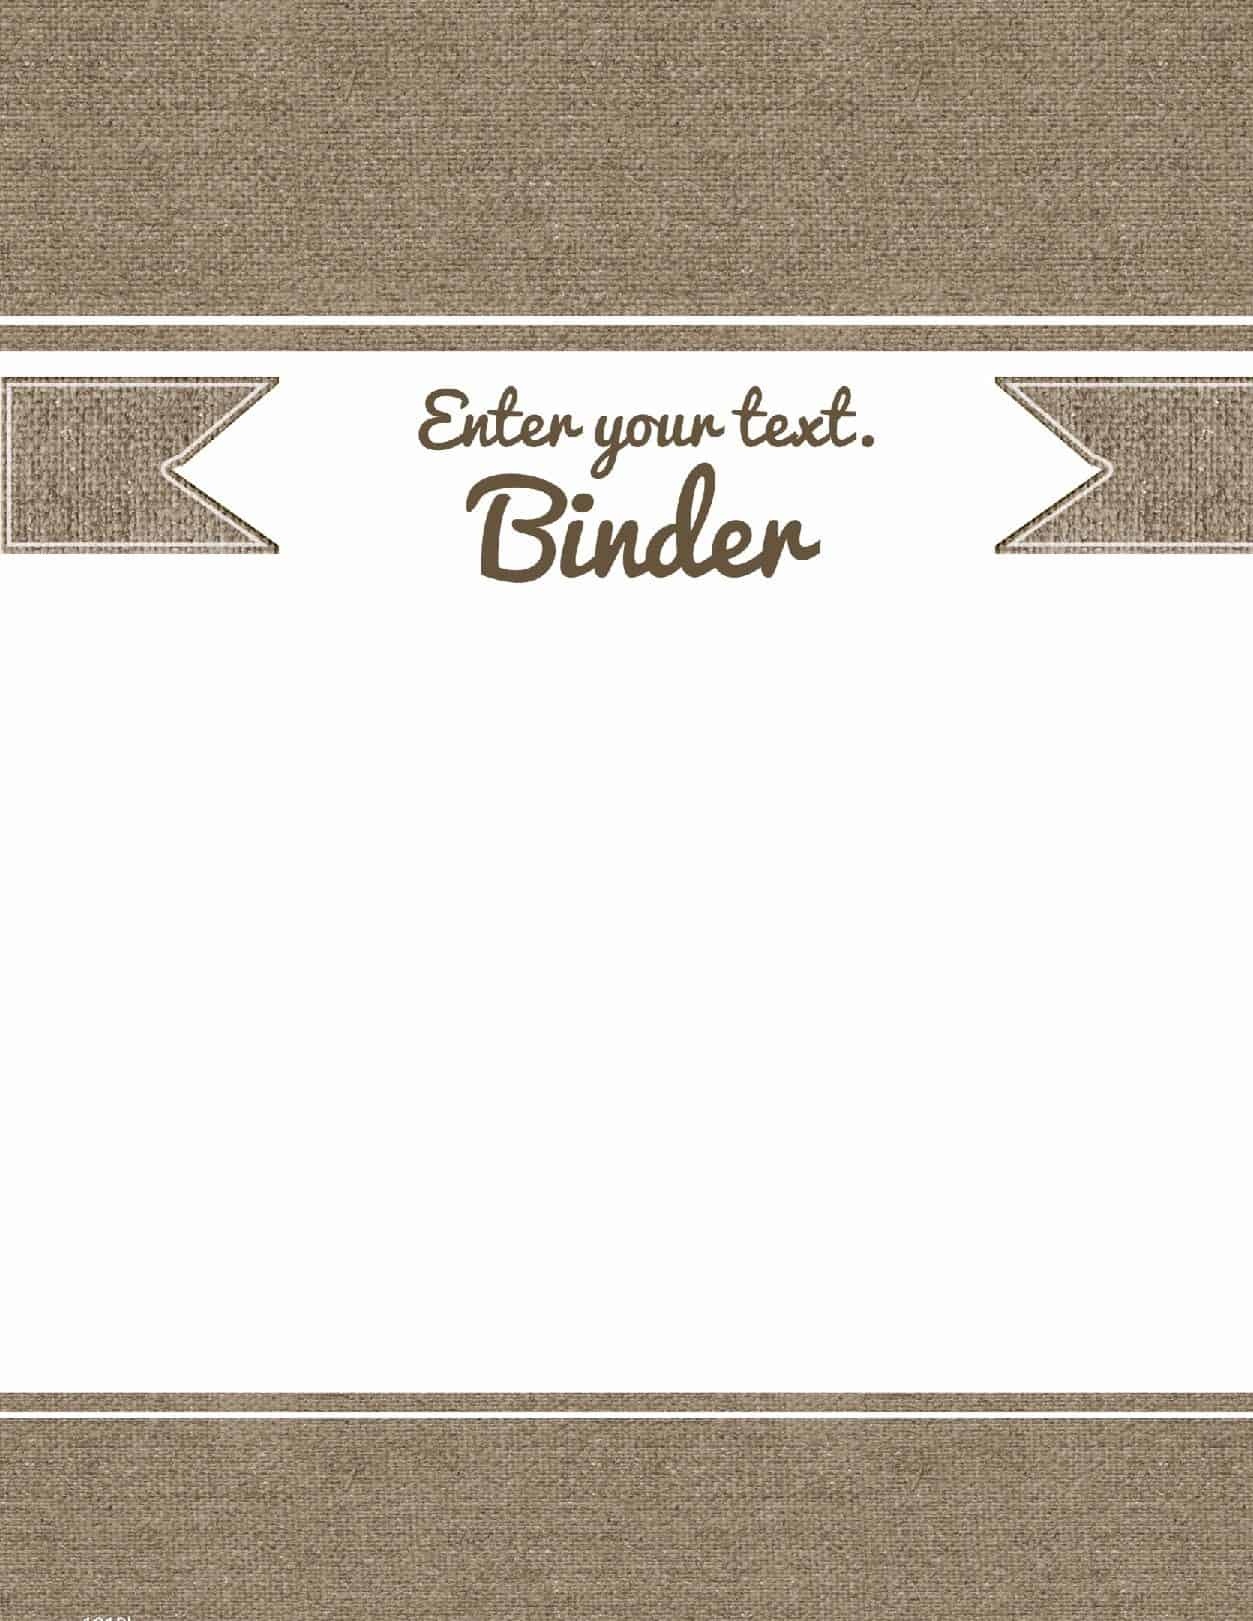 Free Binder Cover Templates | Customize Online &amp; Print At Home | Free! - Free Printable Binder Covers